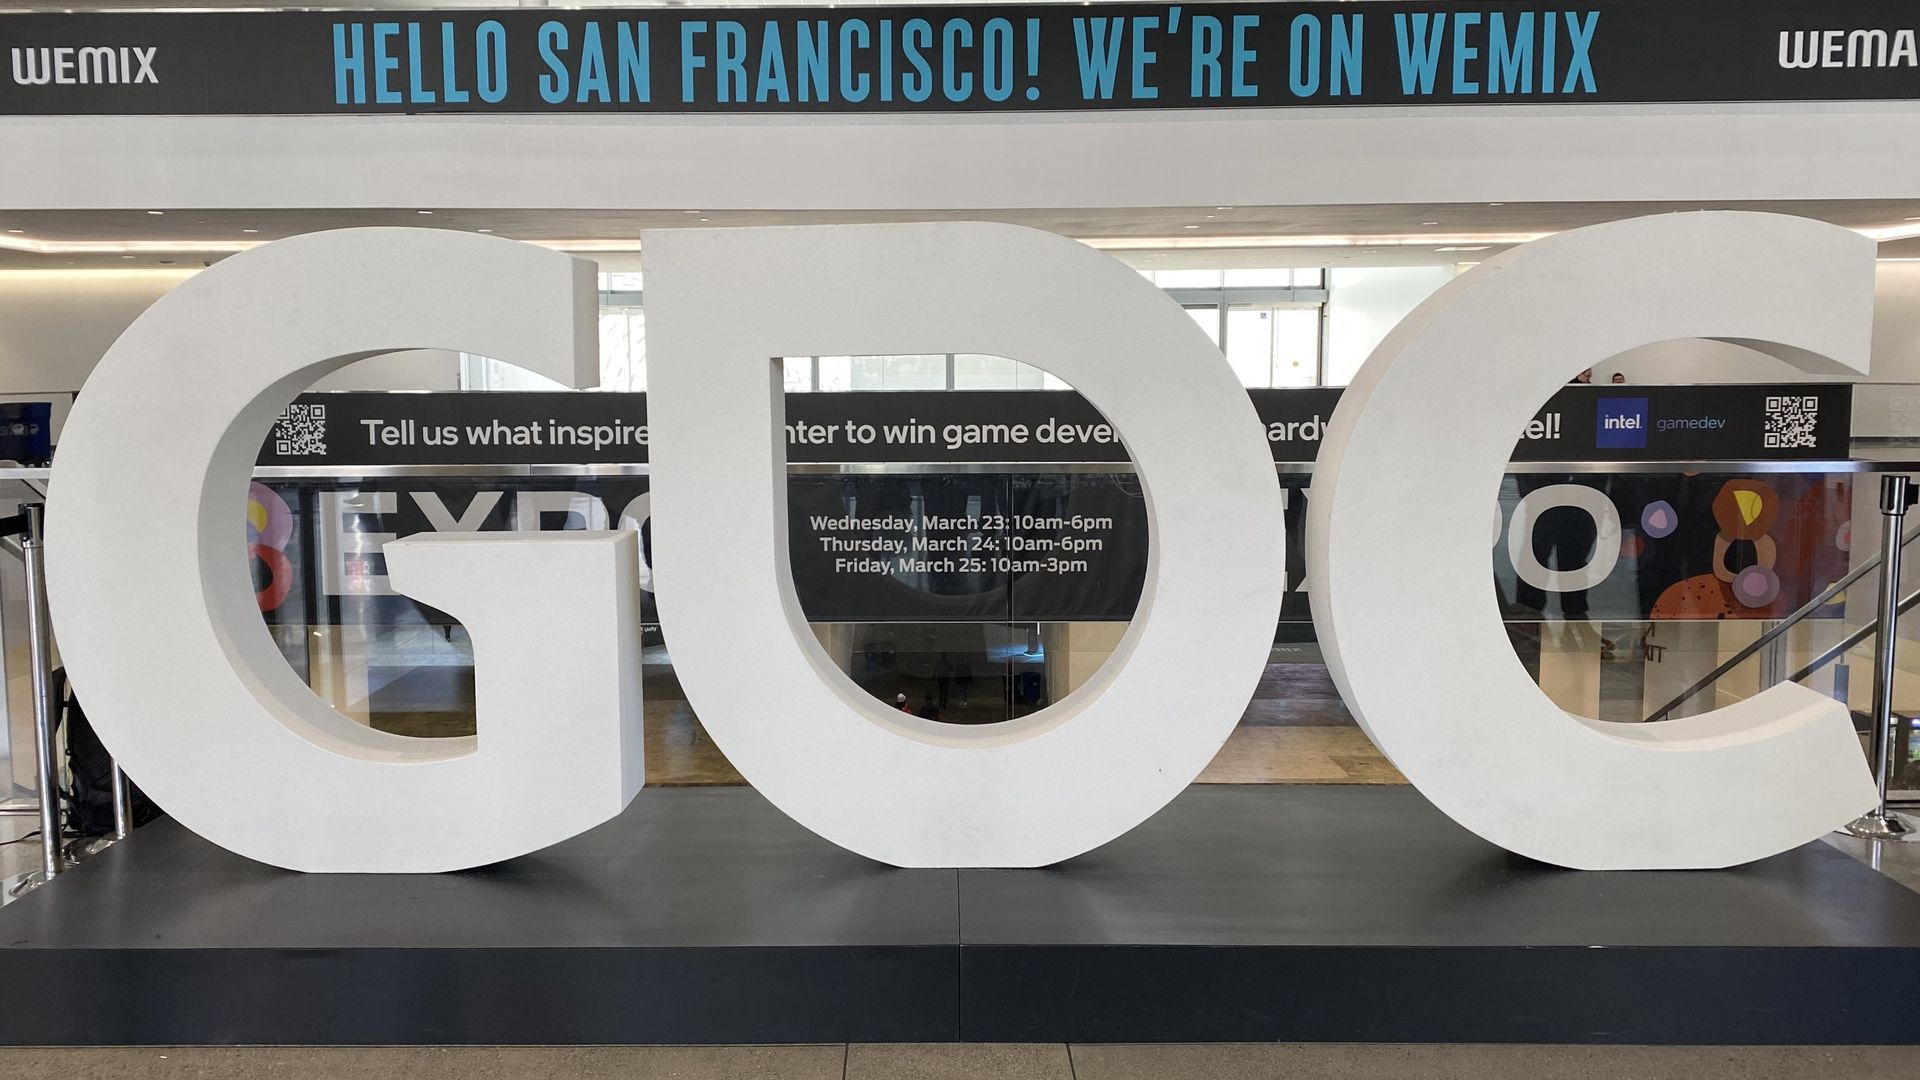 A sign composed of three large letters, G, D and C, below another sign that says "Hello San Francisco"